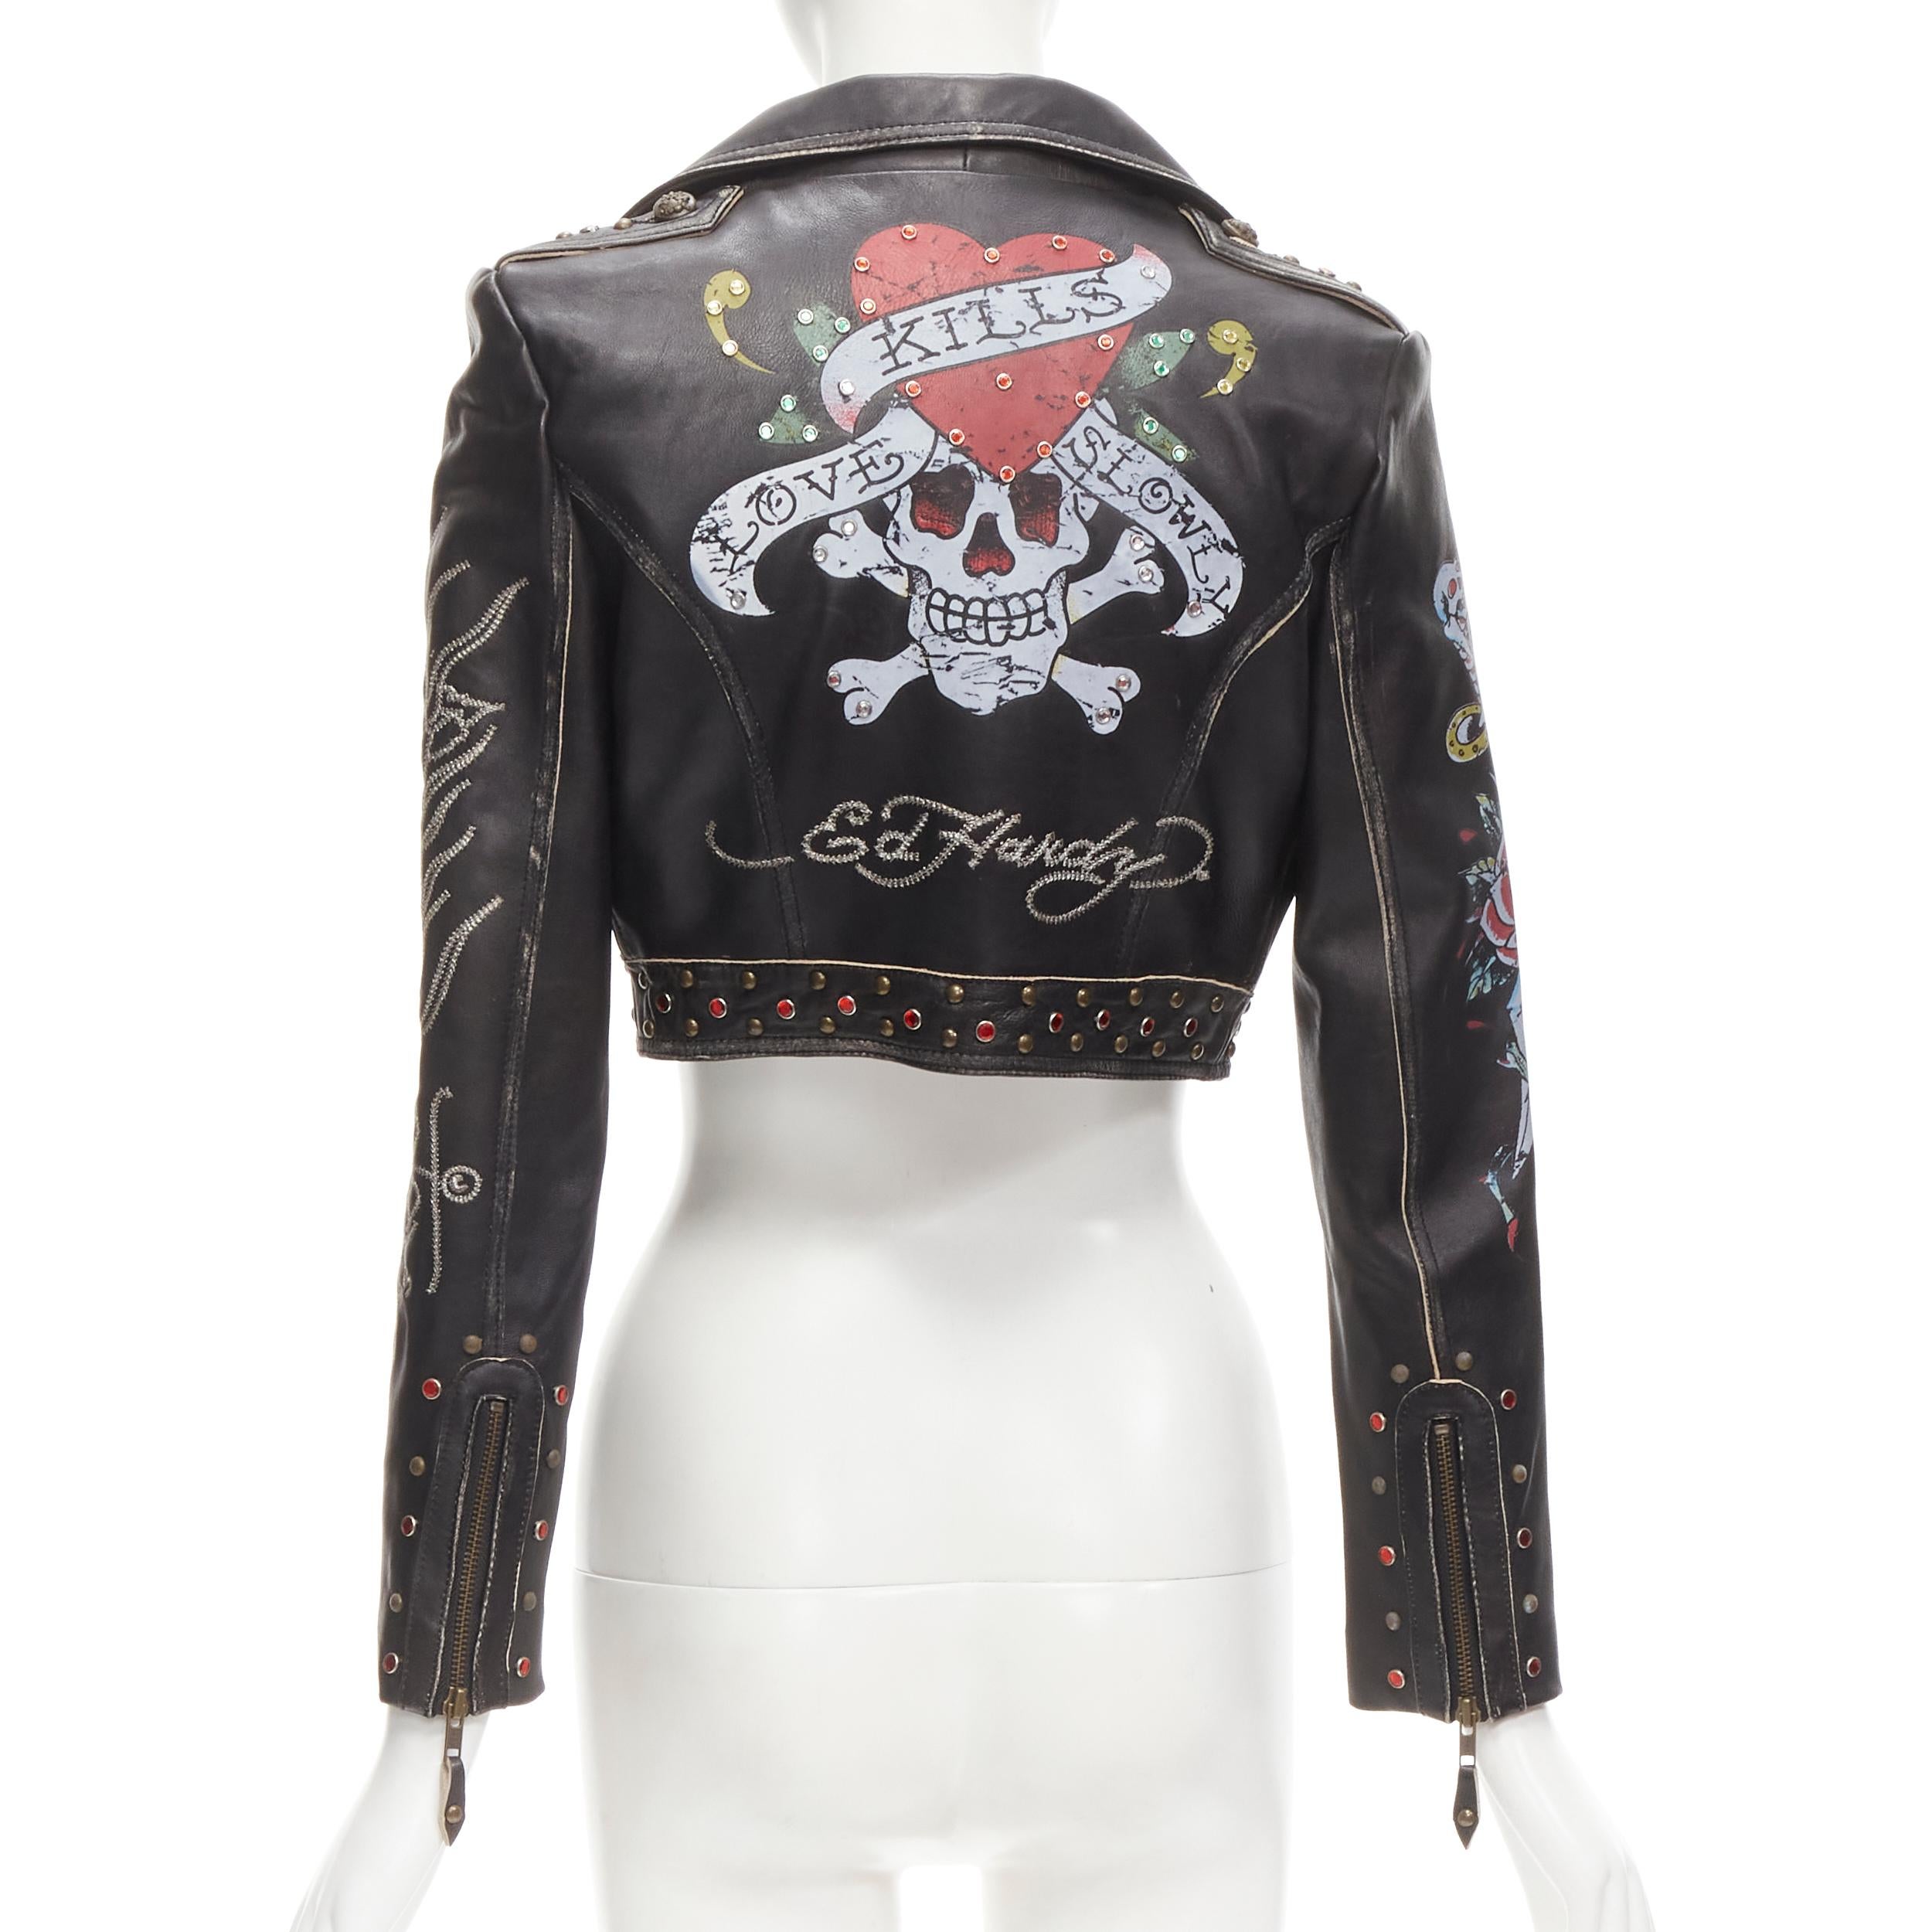 ED HARDY Christian Audigier black leather tattoo studded cropped biker Y2K S
Brand: Ed Hardy
Material: Calfskin Leather
Color: Black
Pattern: Tattoo
Extra Detail: Washed leather distressed feel. Rhinestone and gold stud embellishments. Tattoo print.